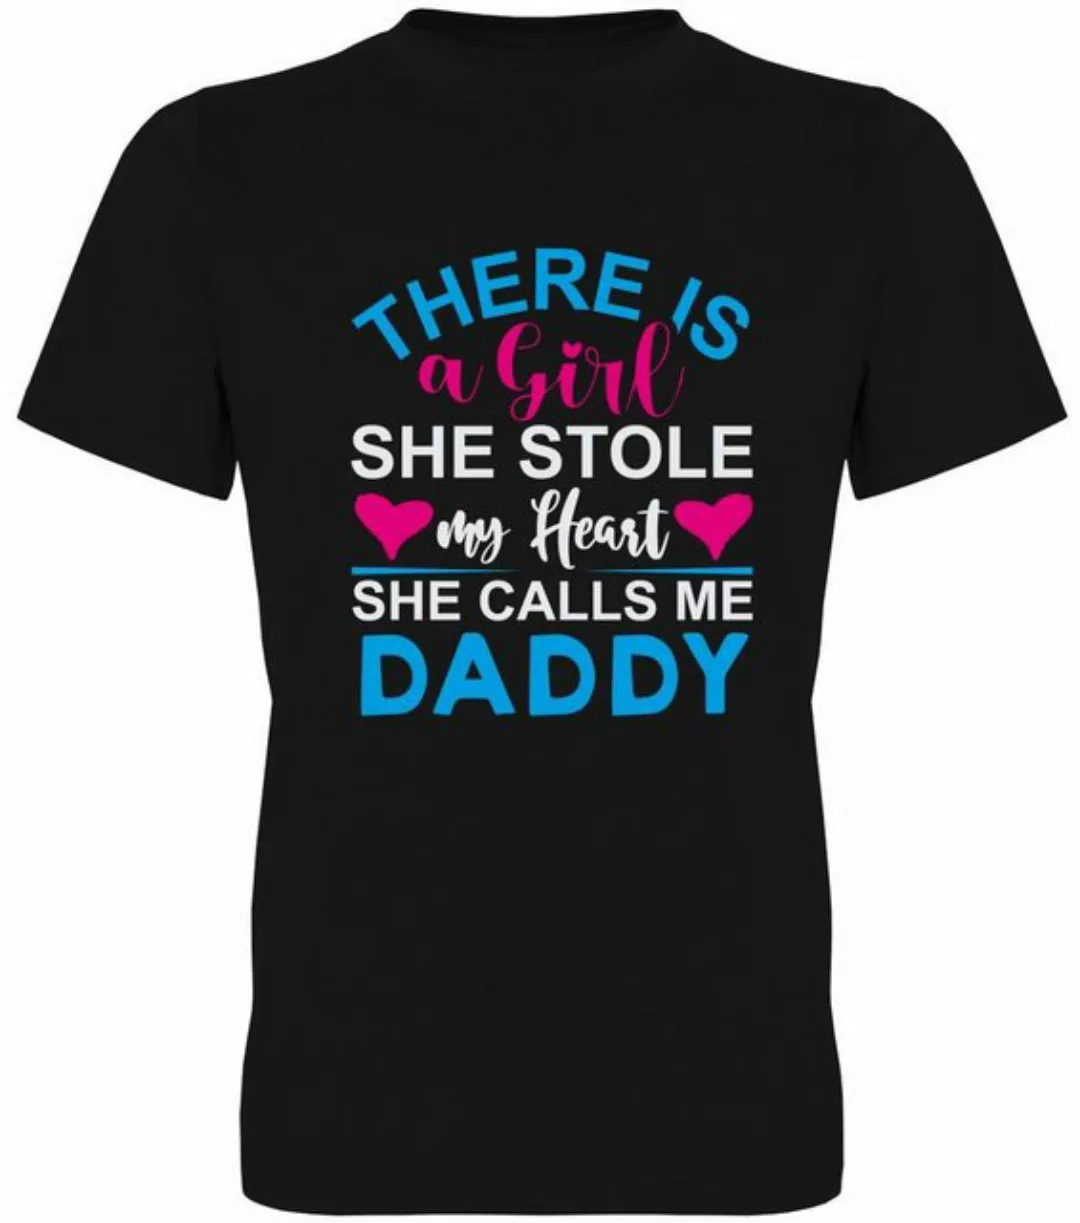 G-graphics T-Shirt There is a girl, she stole my heart, she calls me Daddy günstig online kaufen